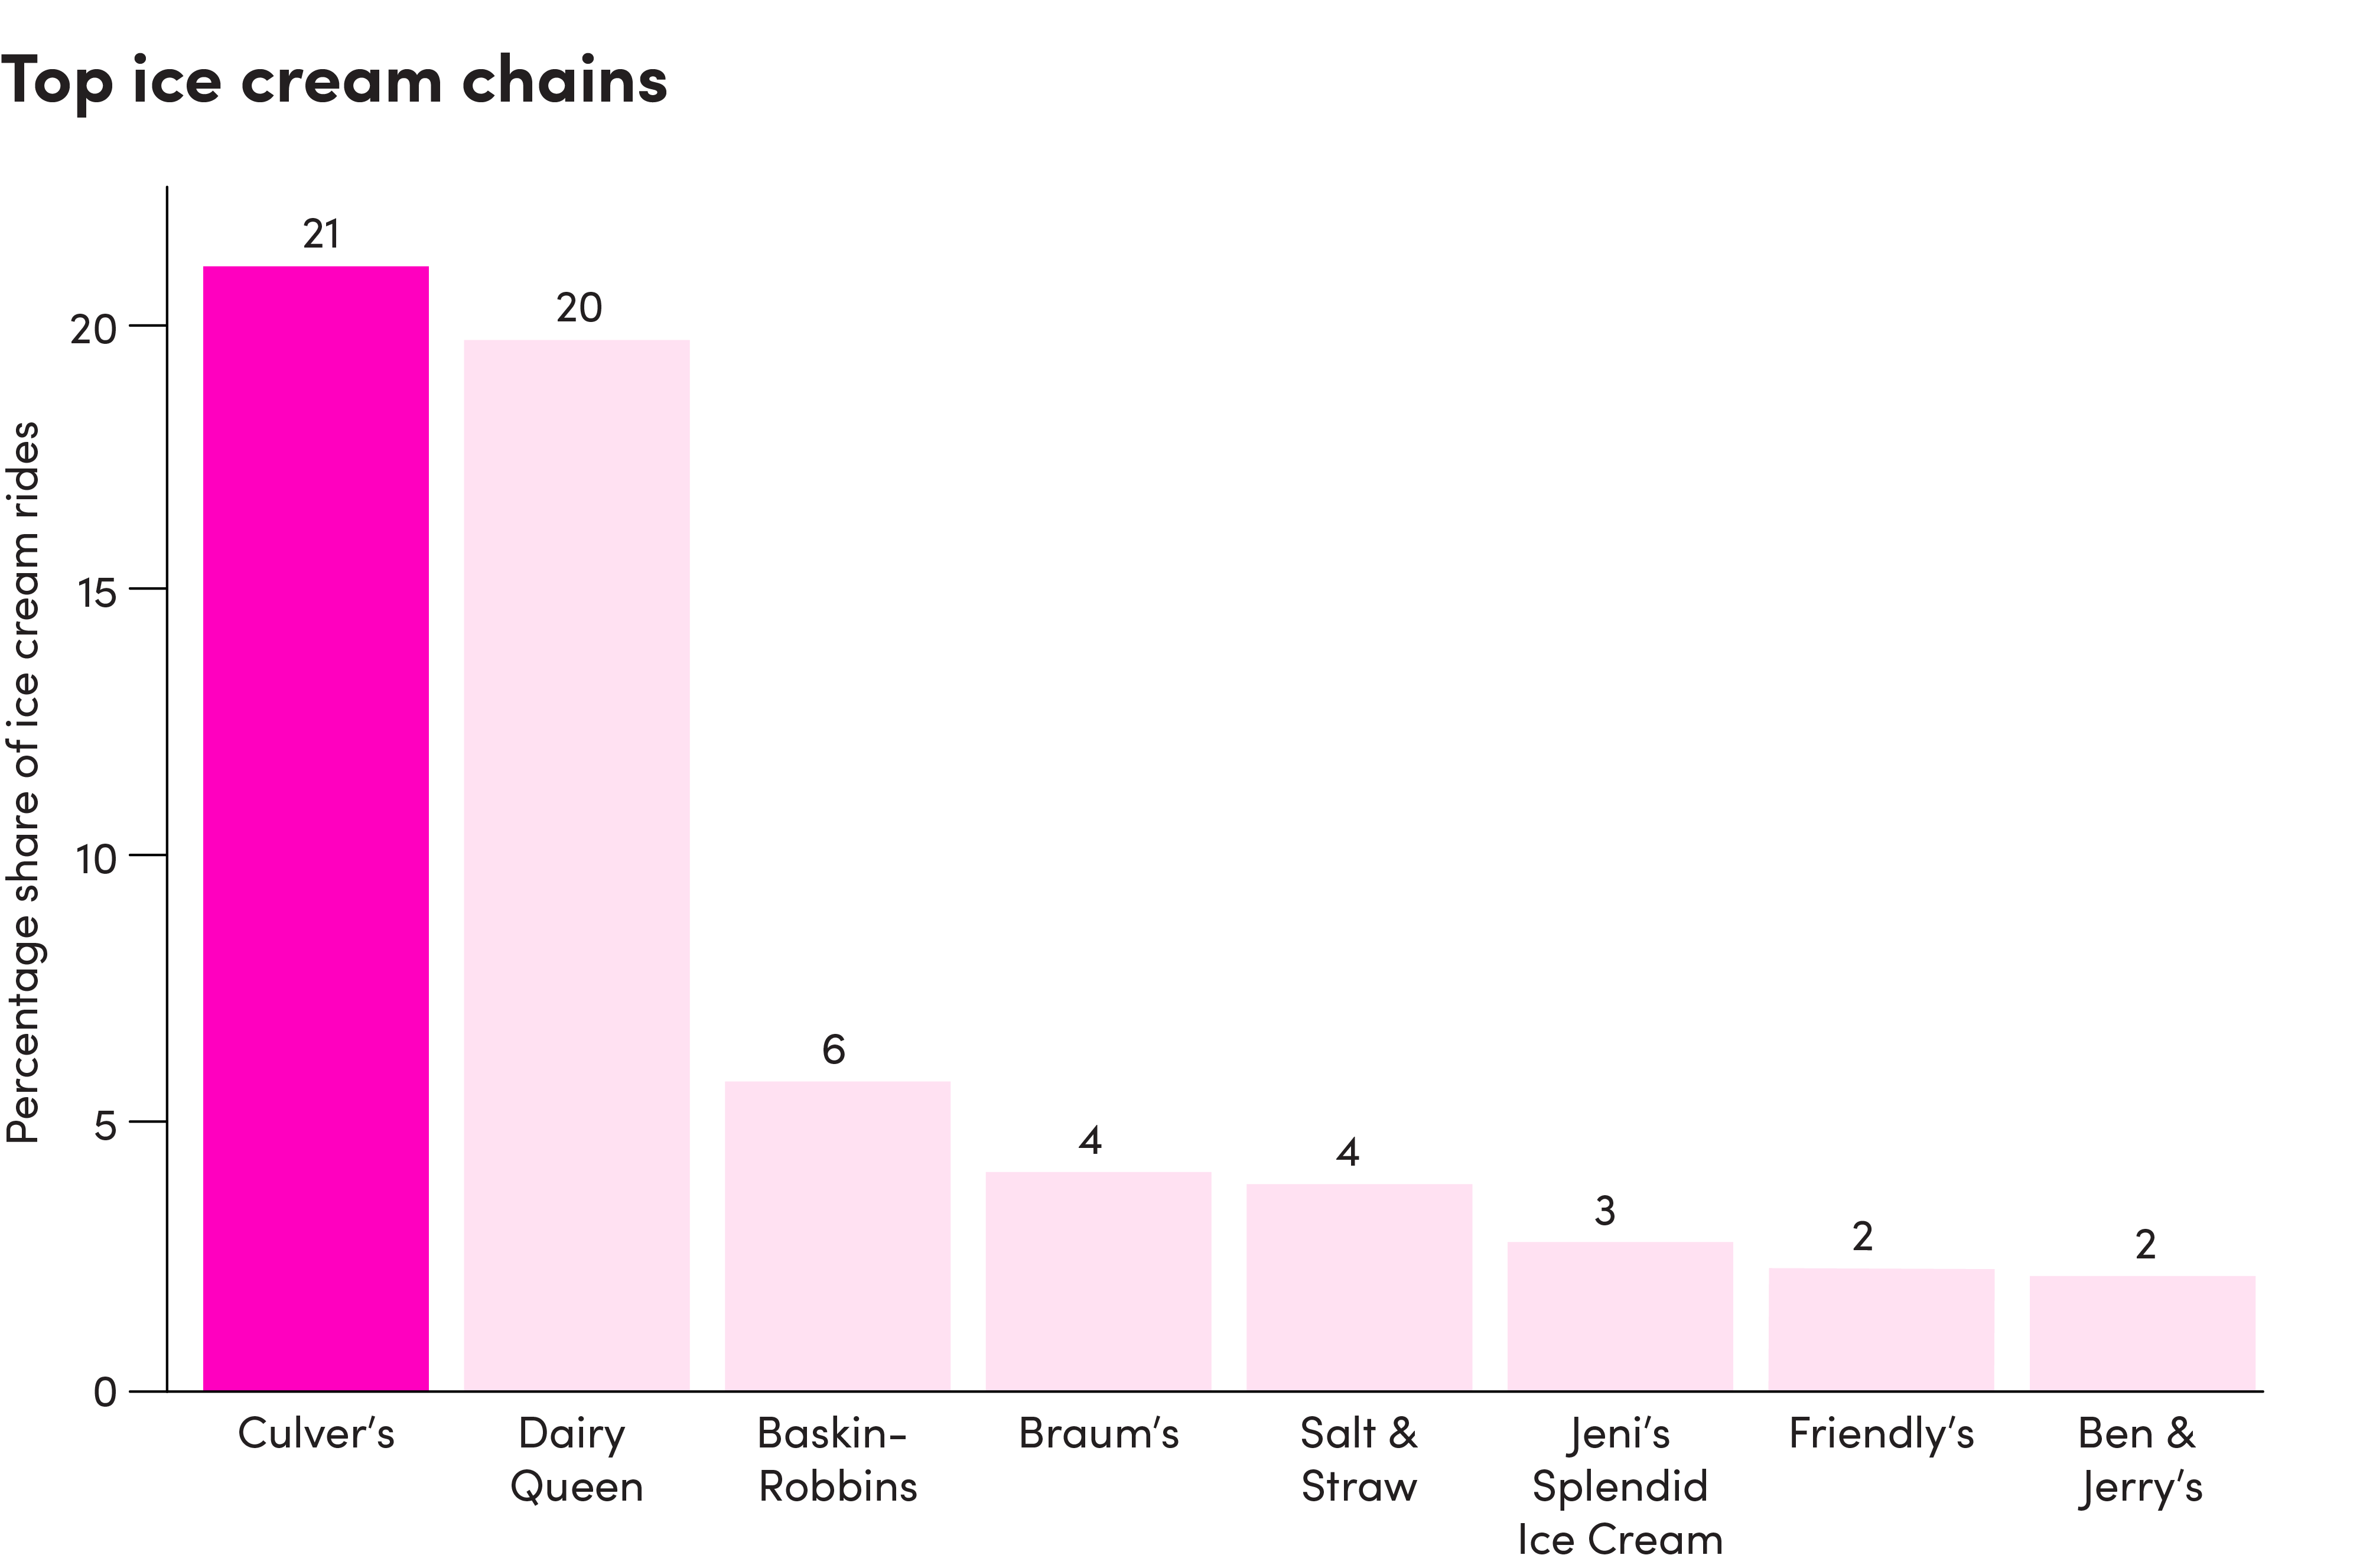 Bar chart showing names of top ice cream chains.